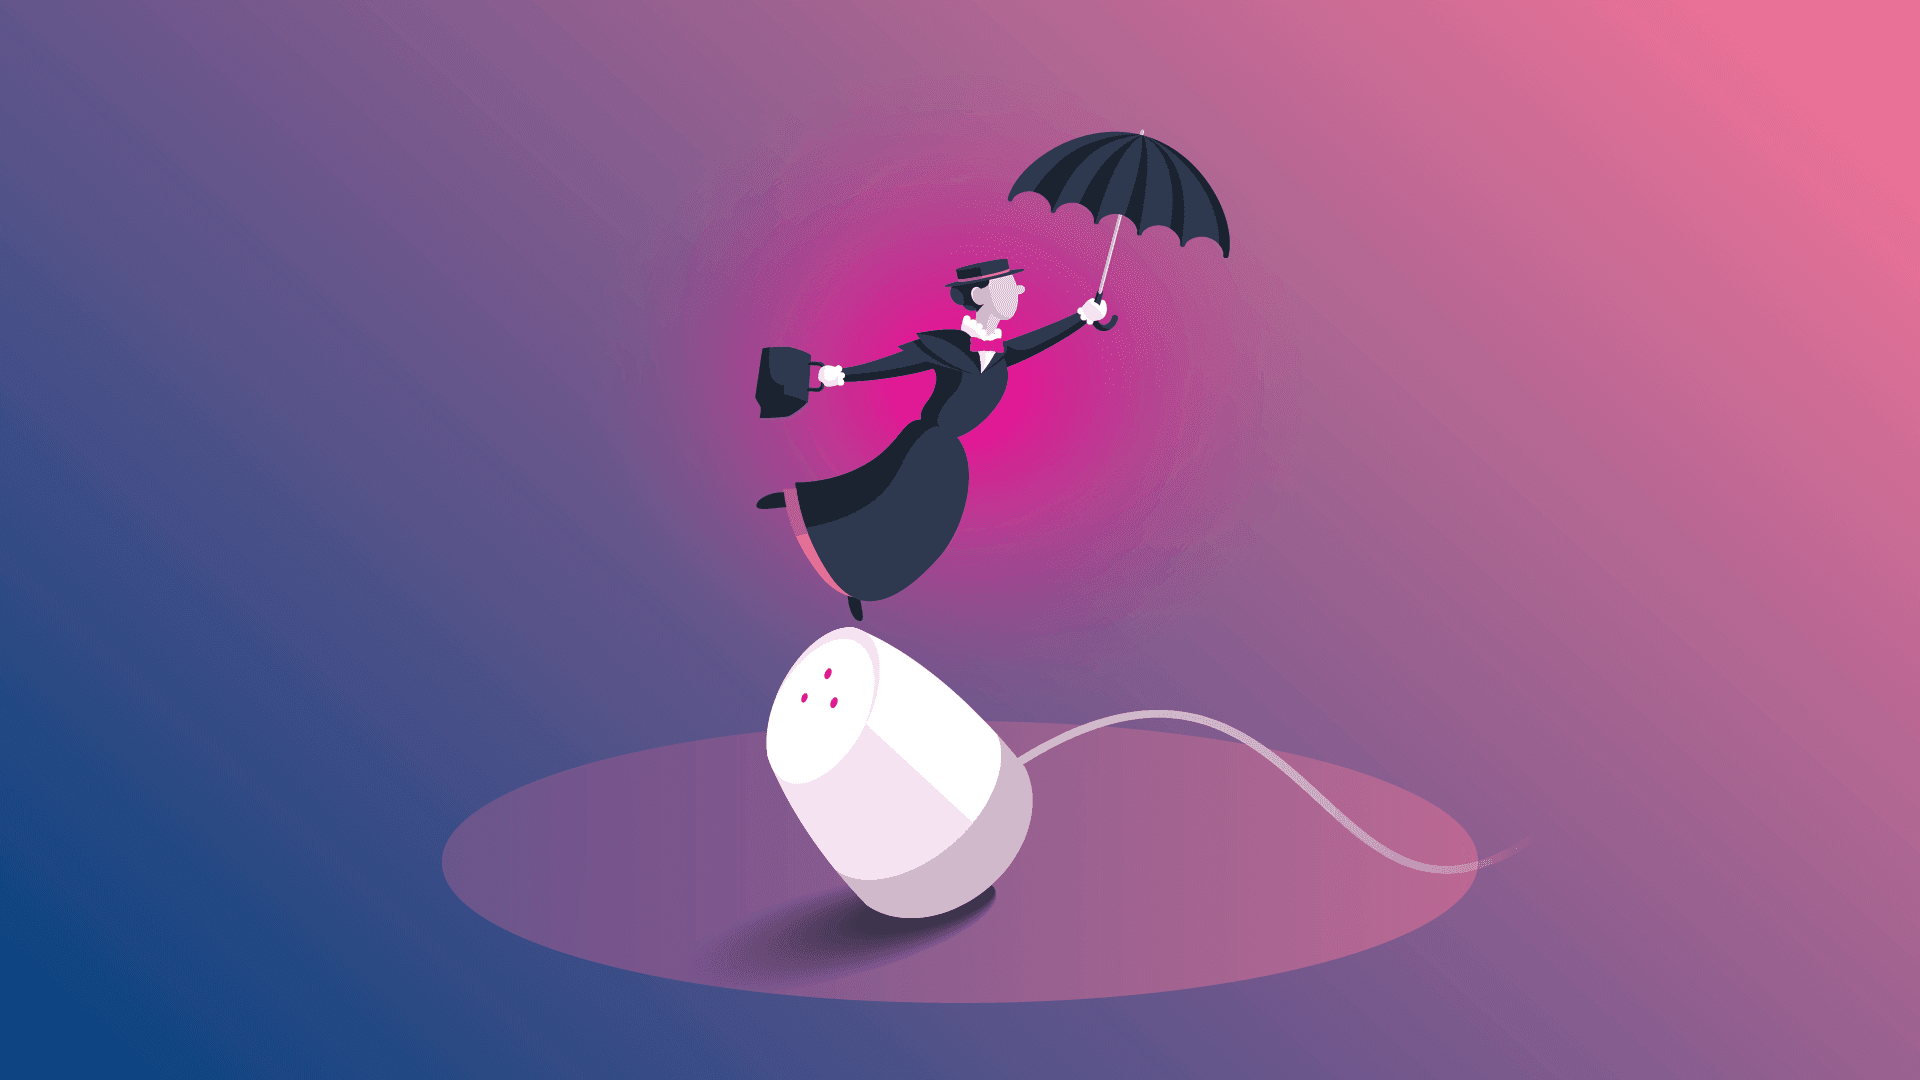 Illustration of Mary Poppins standing with an umbrella on top of a smart speaker